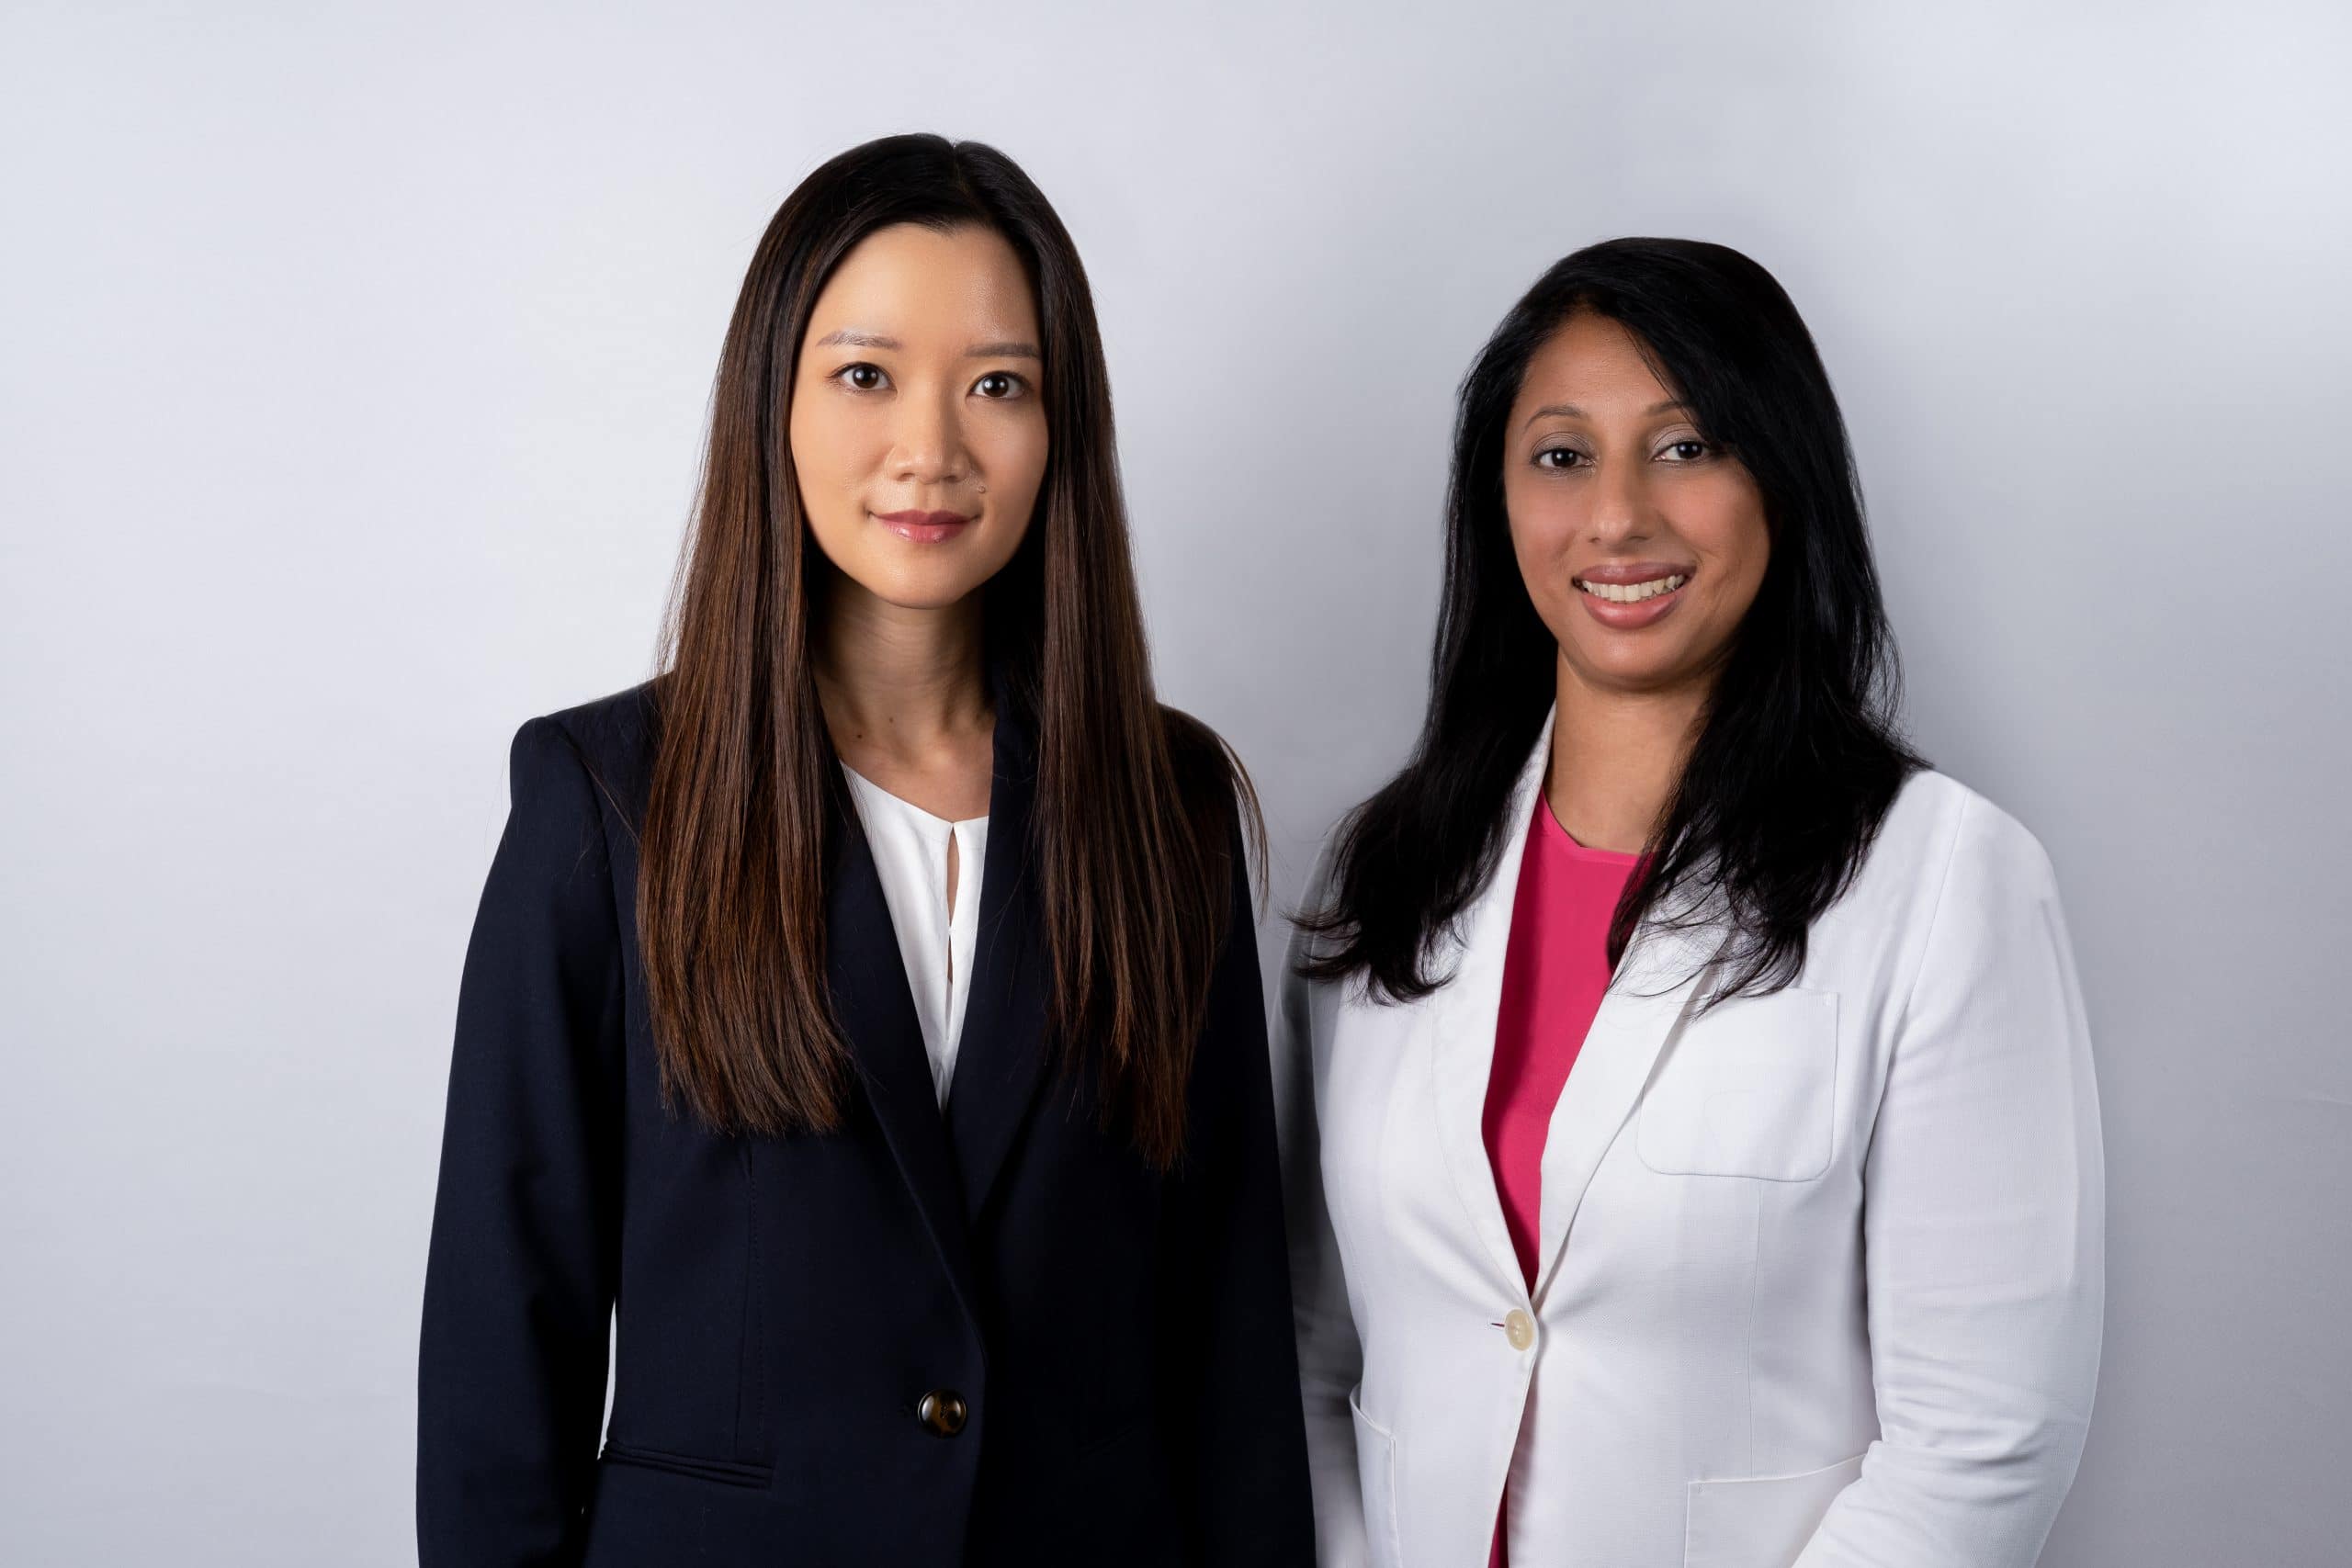 Sandpiper promotes Sarada Chellam and Elizabeth Chu to lead its growing Singapore office